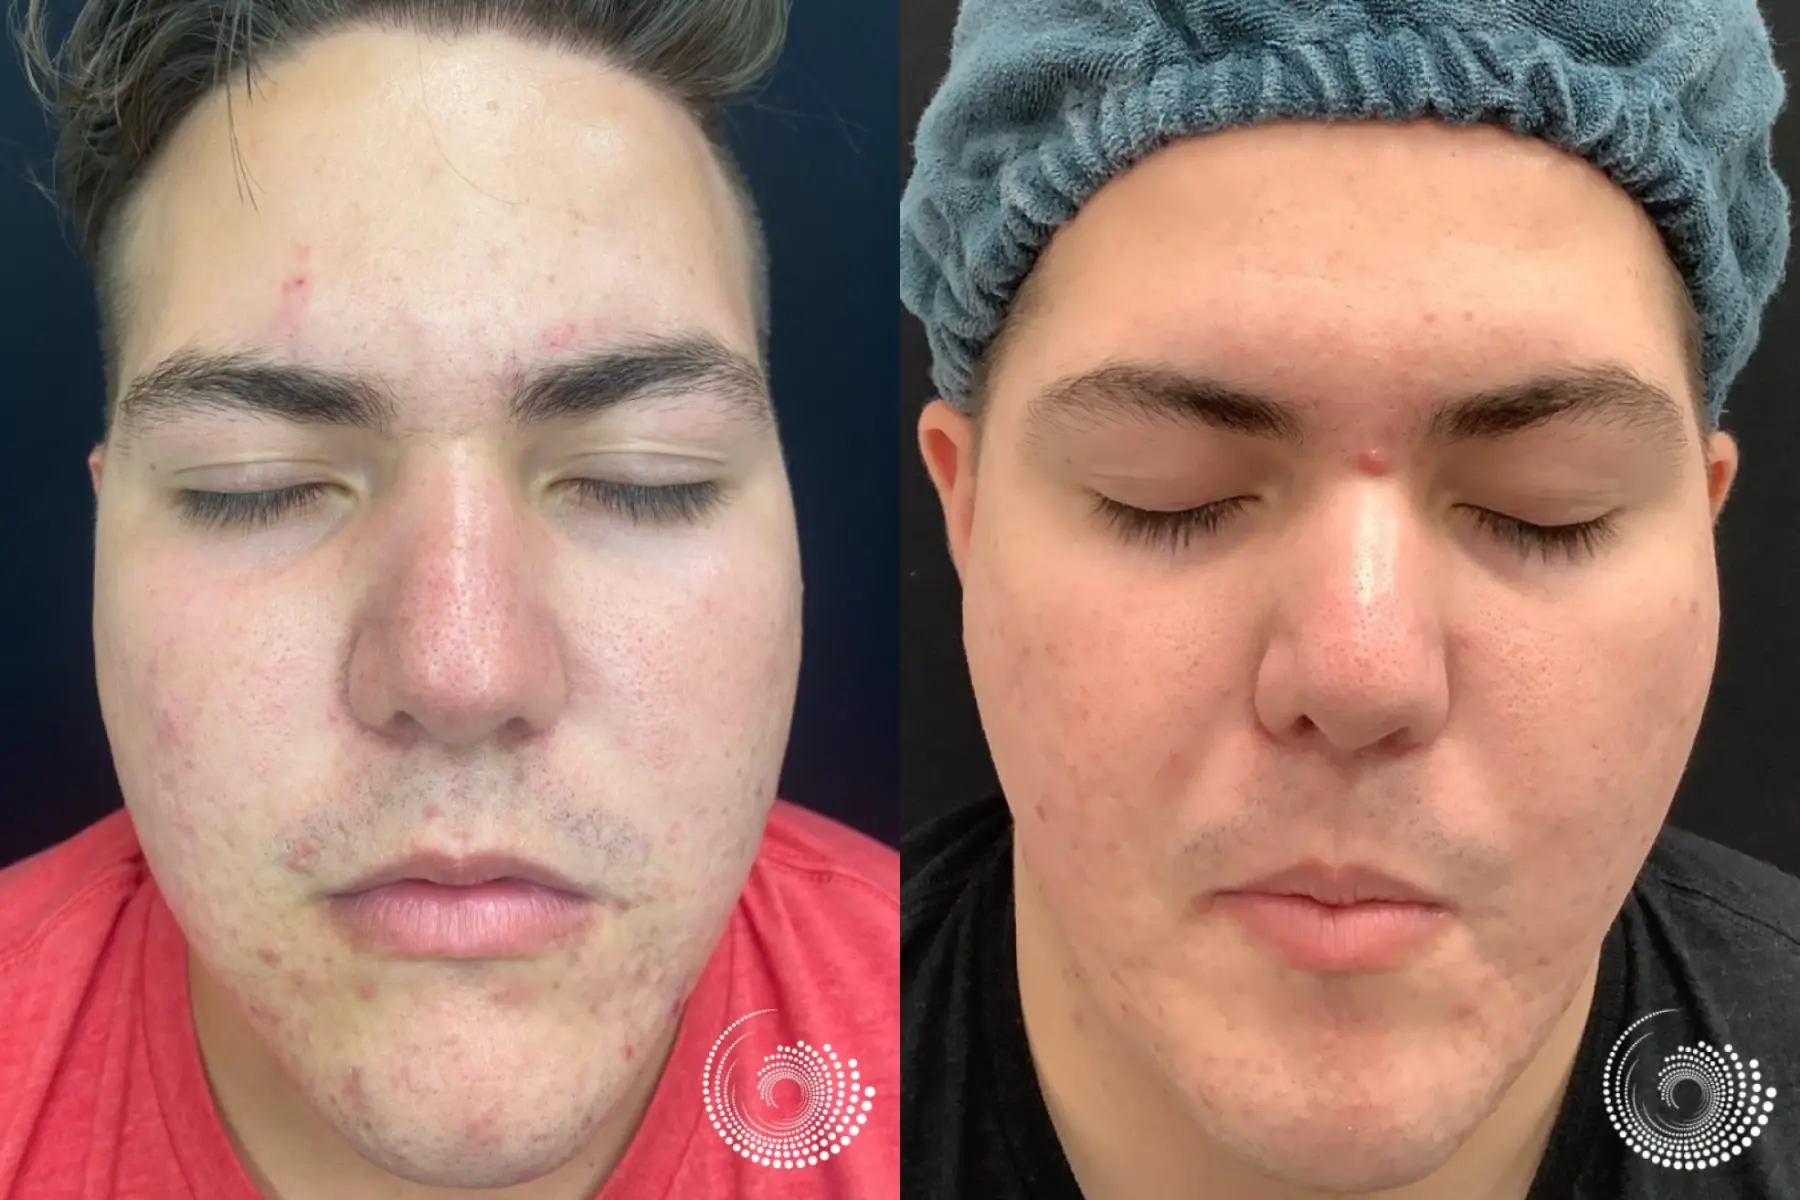 SkinPen Microneedling to smooth acne scars - Before and After 1